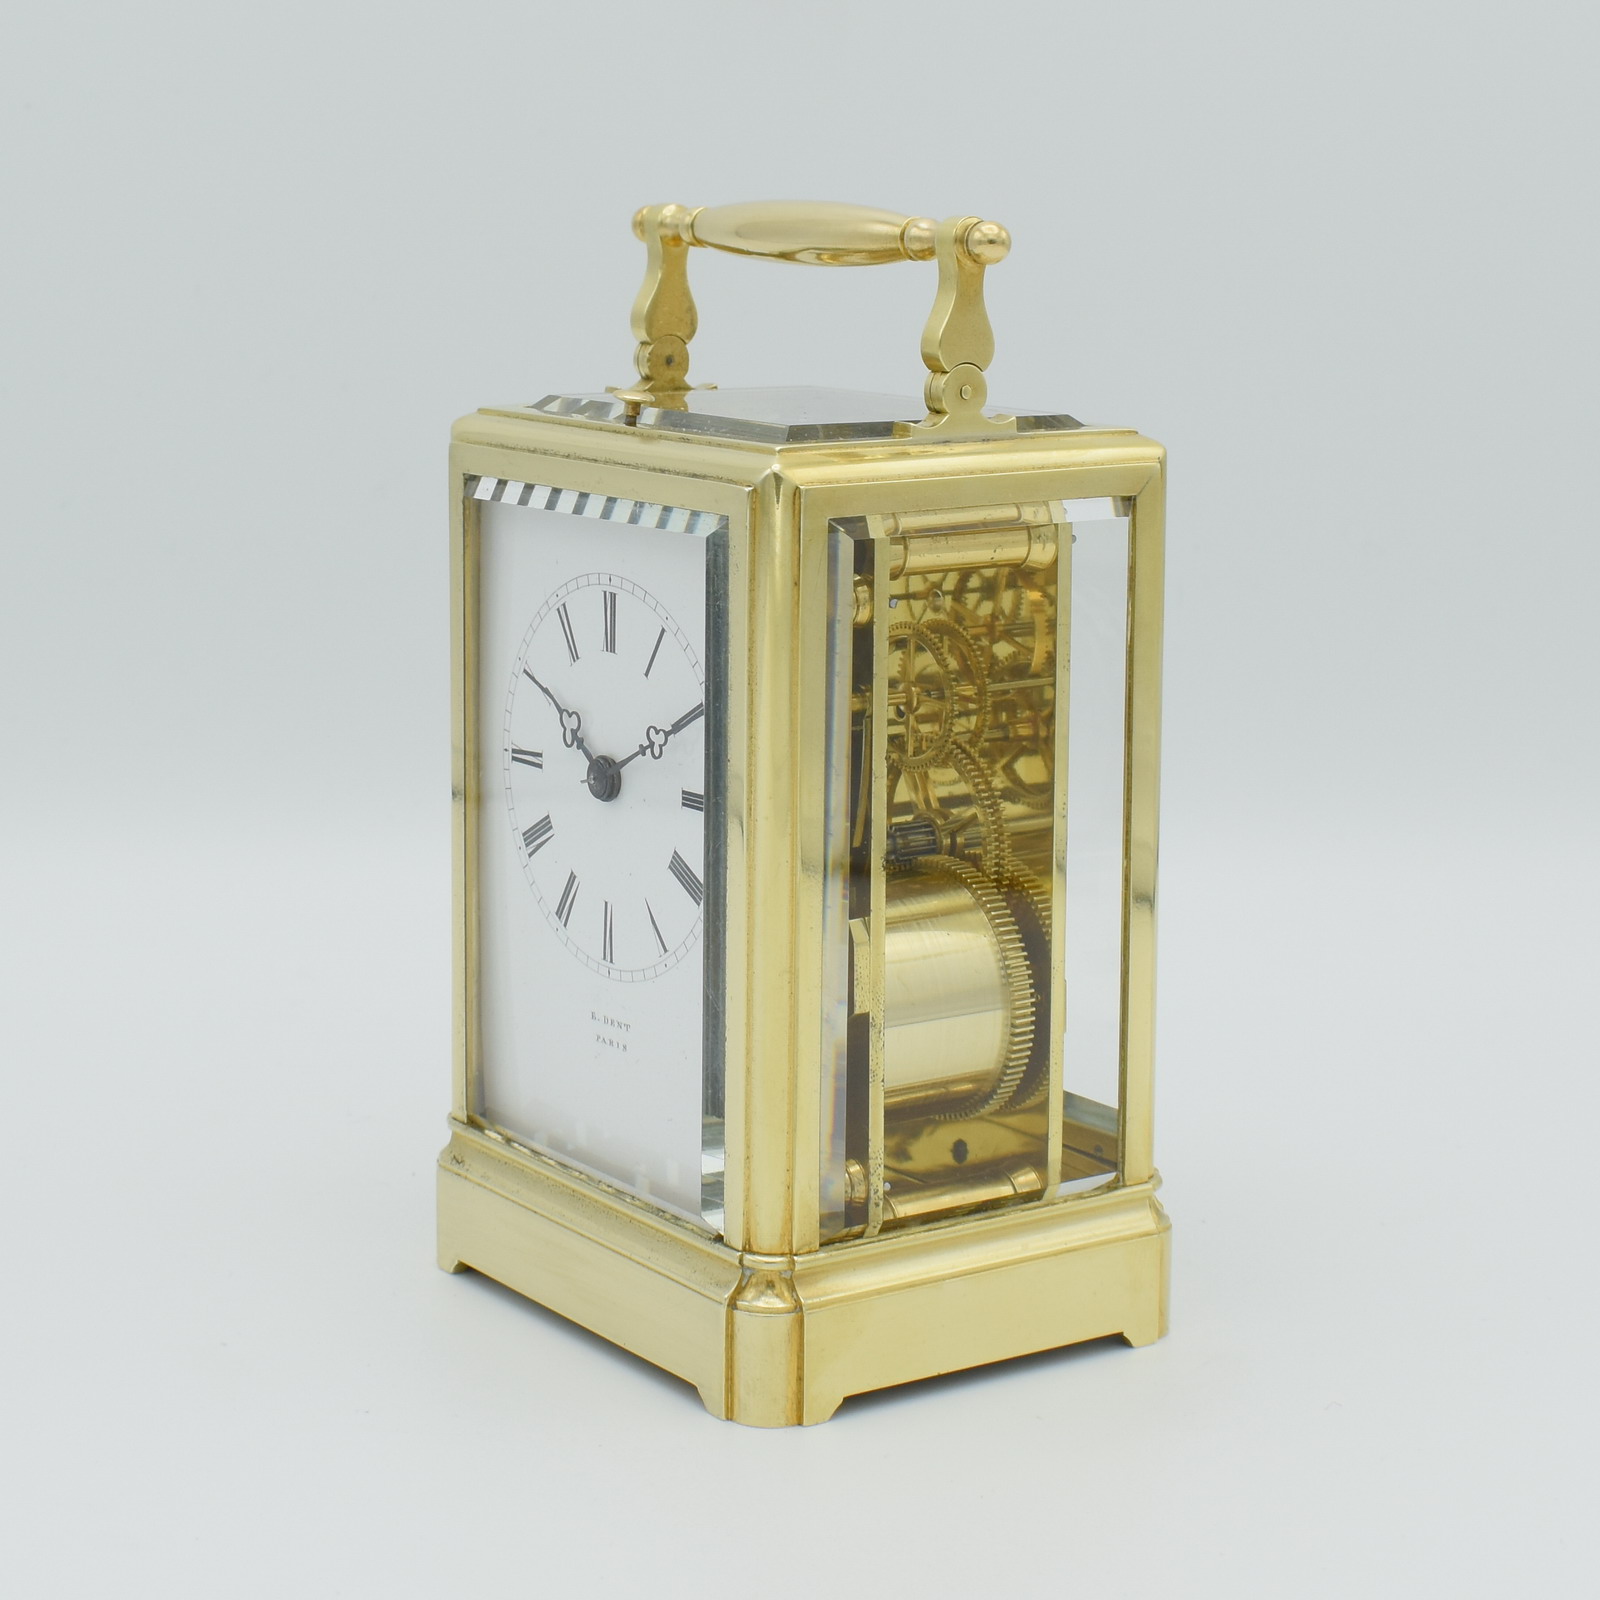 E. Dent Carriage Clock – It's About Time